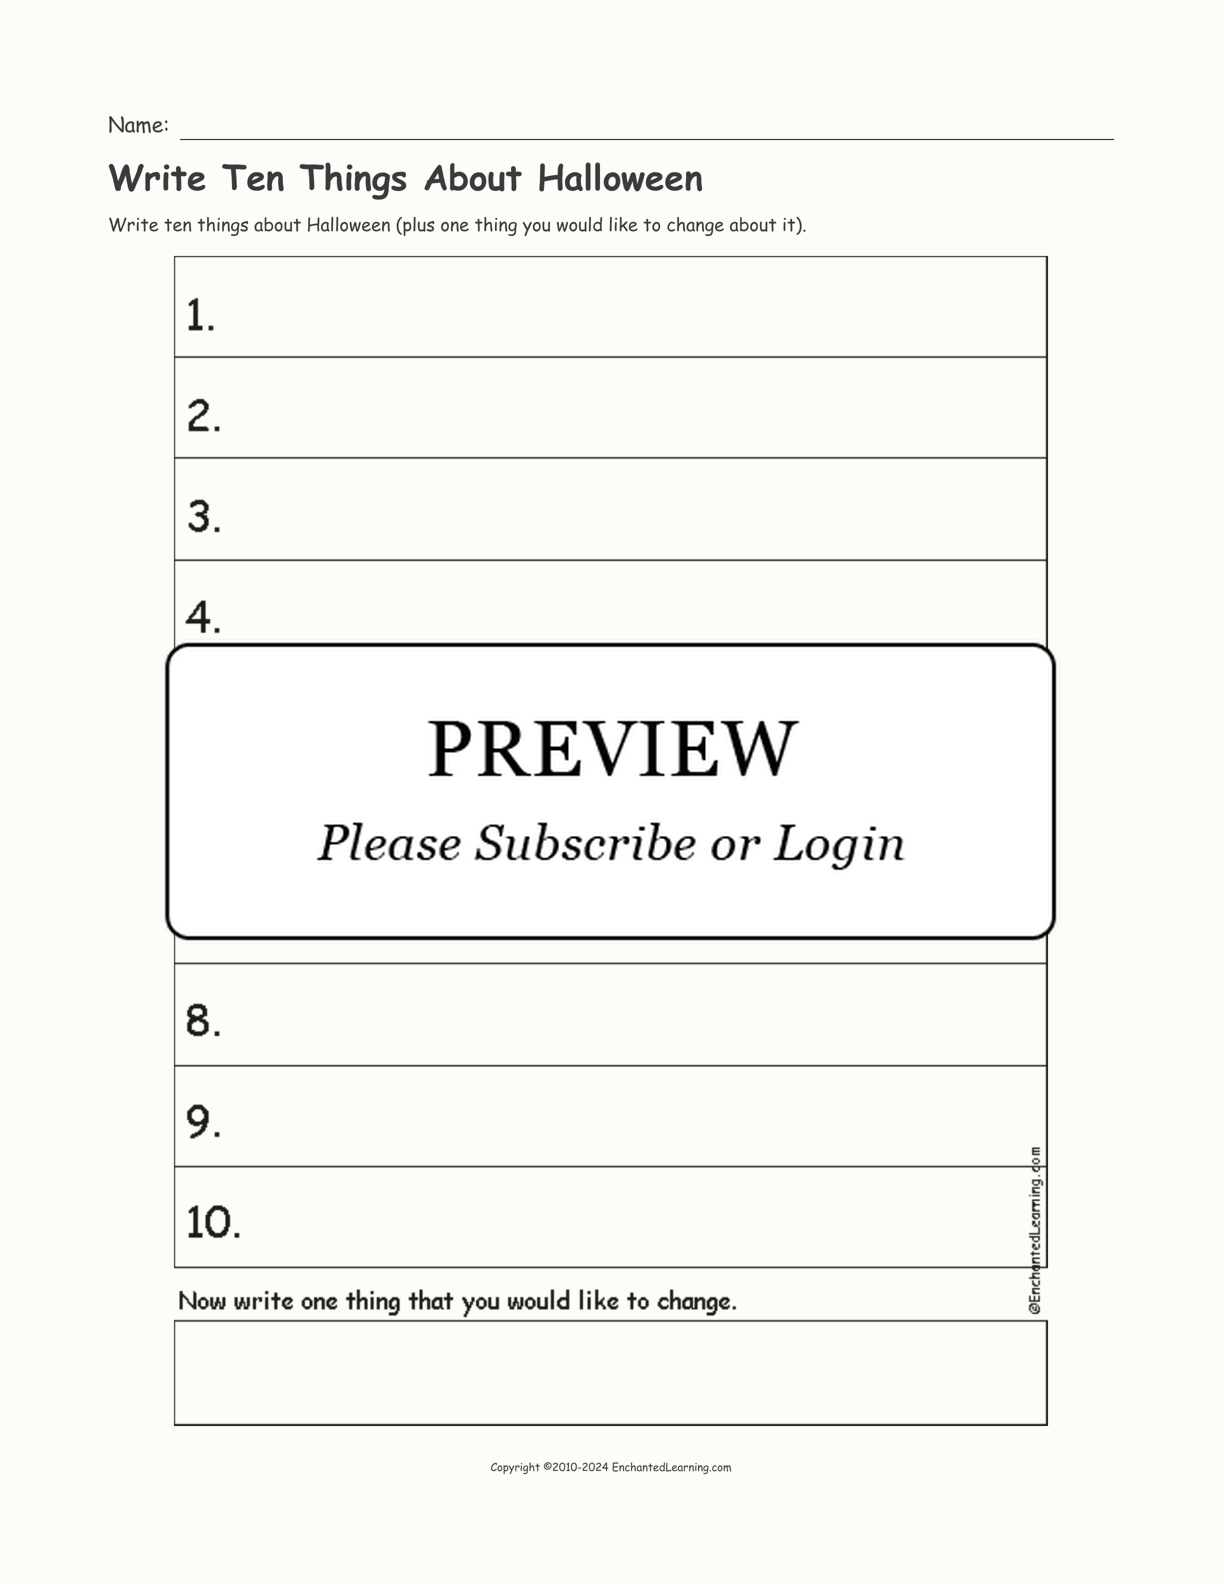 Write Ten Things About Halloween interactive printout page 1